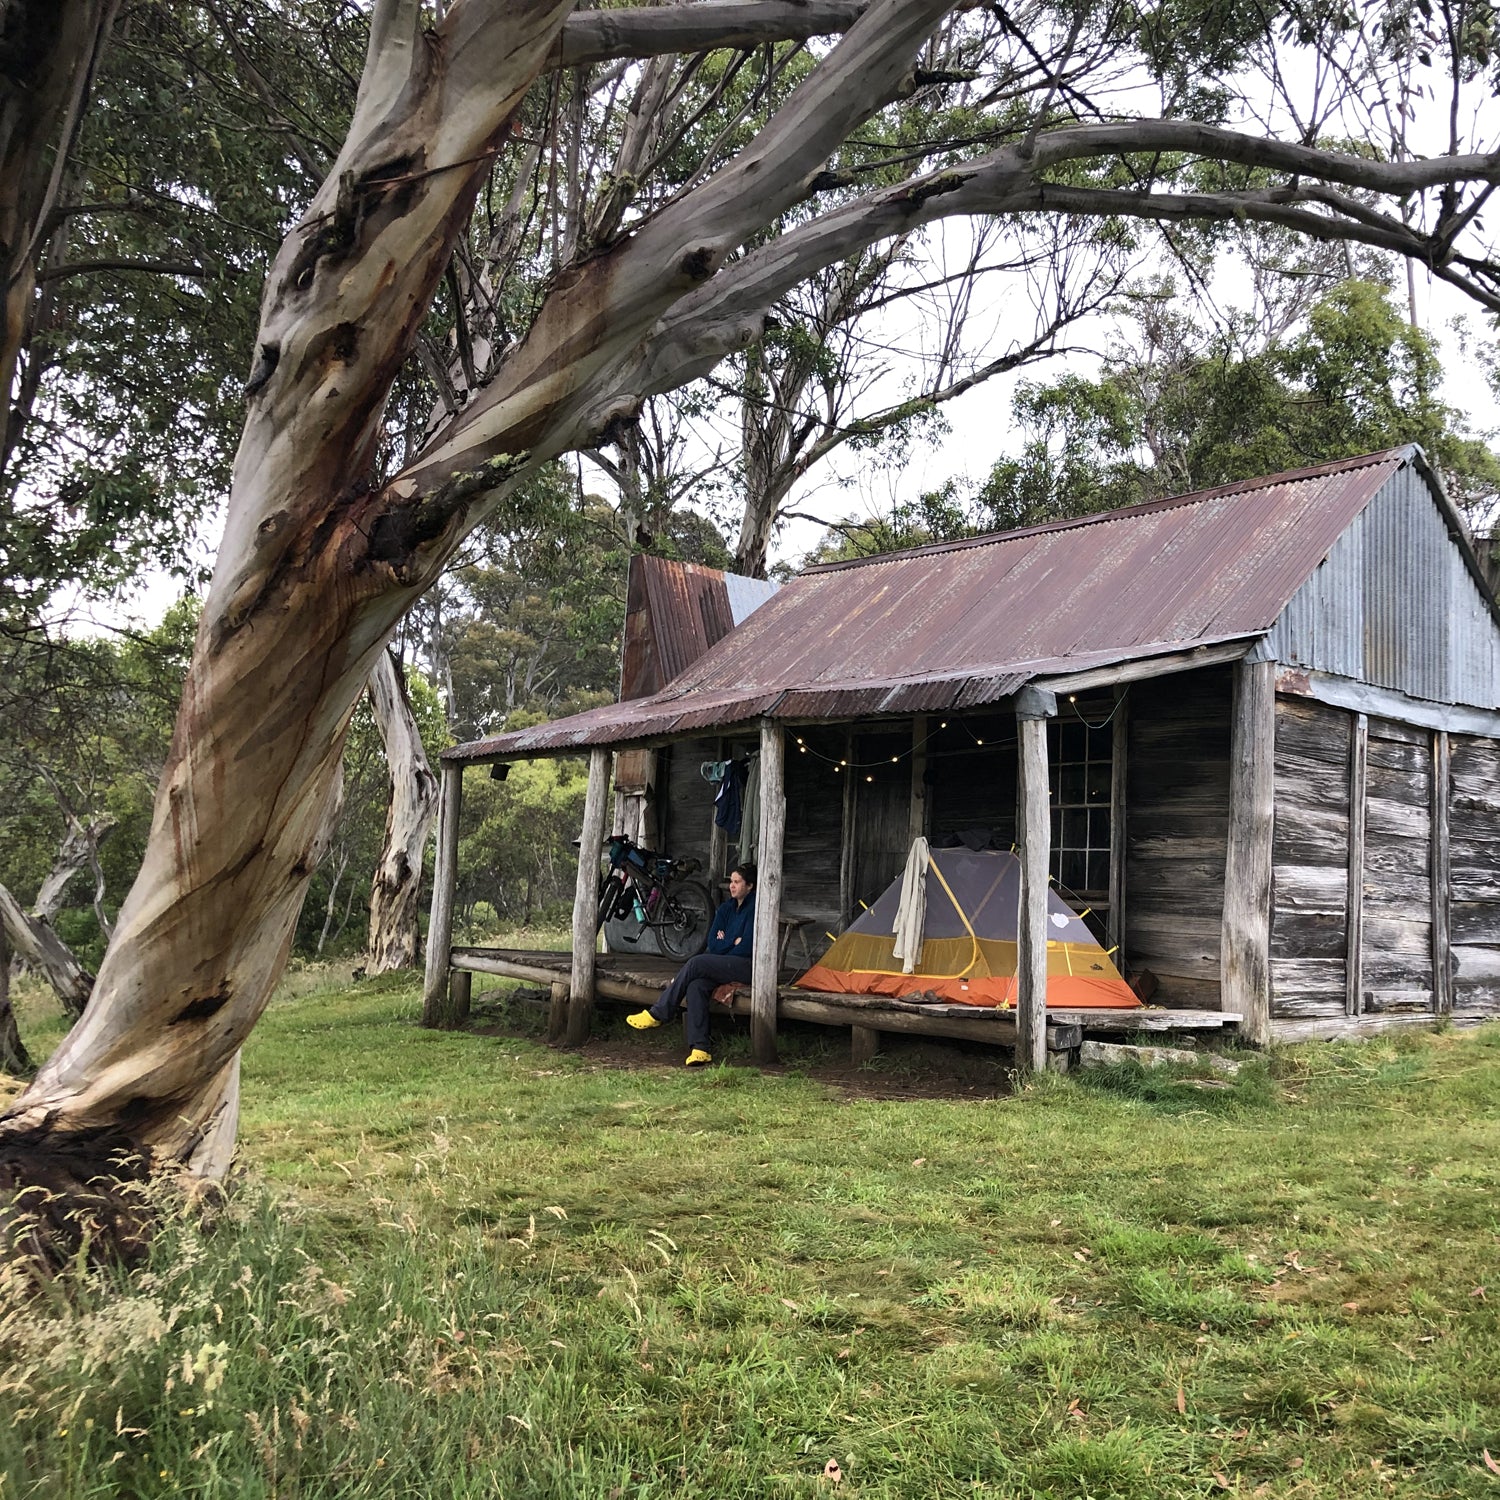 Northern Kosciuszko Huts and Rain on a Tin Roof. By Kirsten.